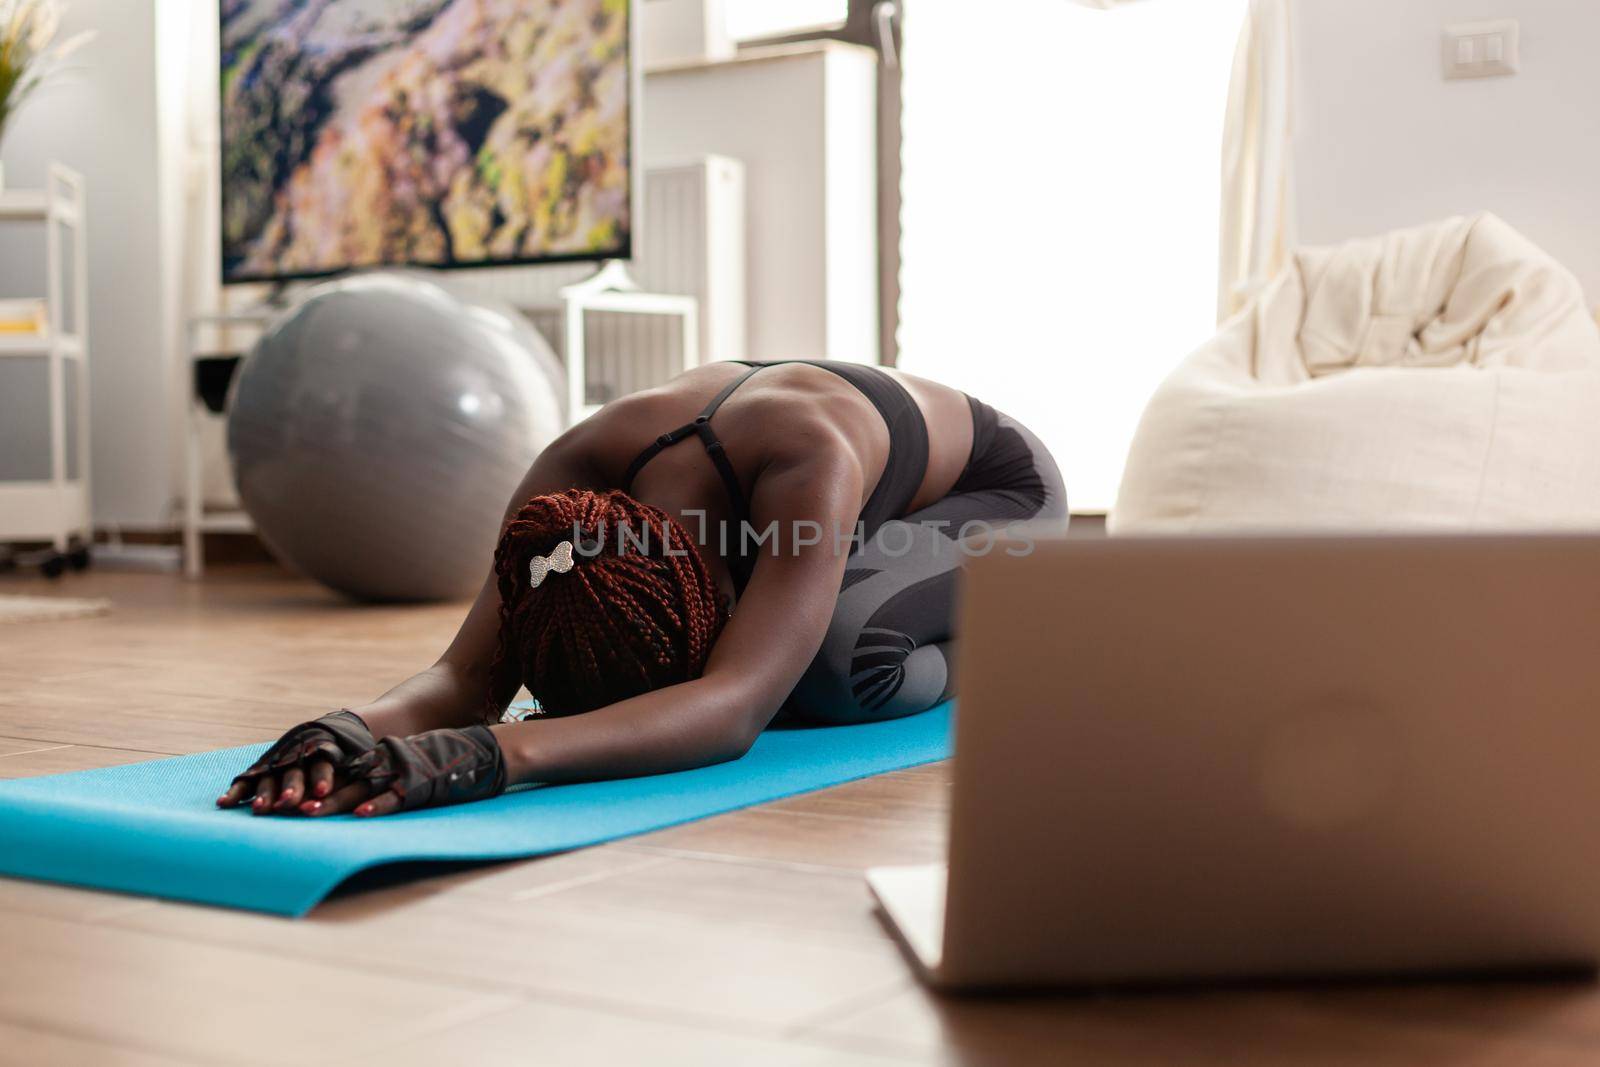 Black woman exercising and stretching her body doing flexibility exercises sitting on yoga mat in home living room wearing leggings during online tutorial. Workout and healthy lifestyle.